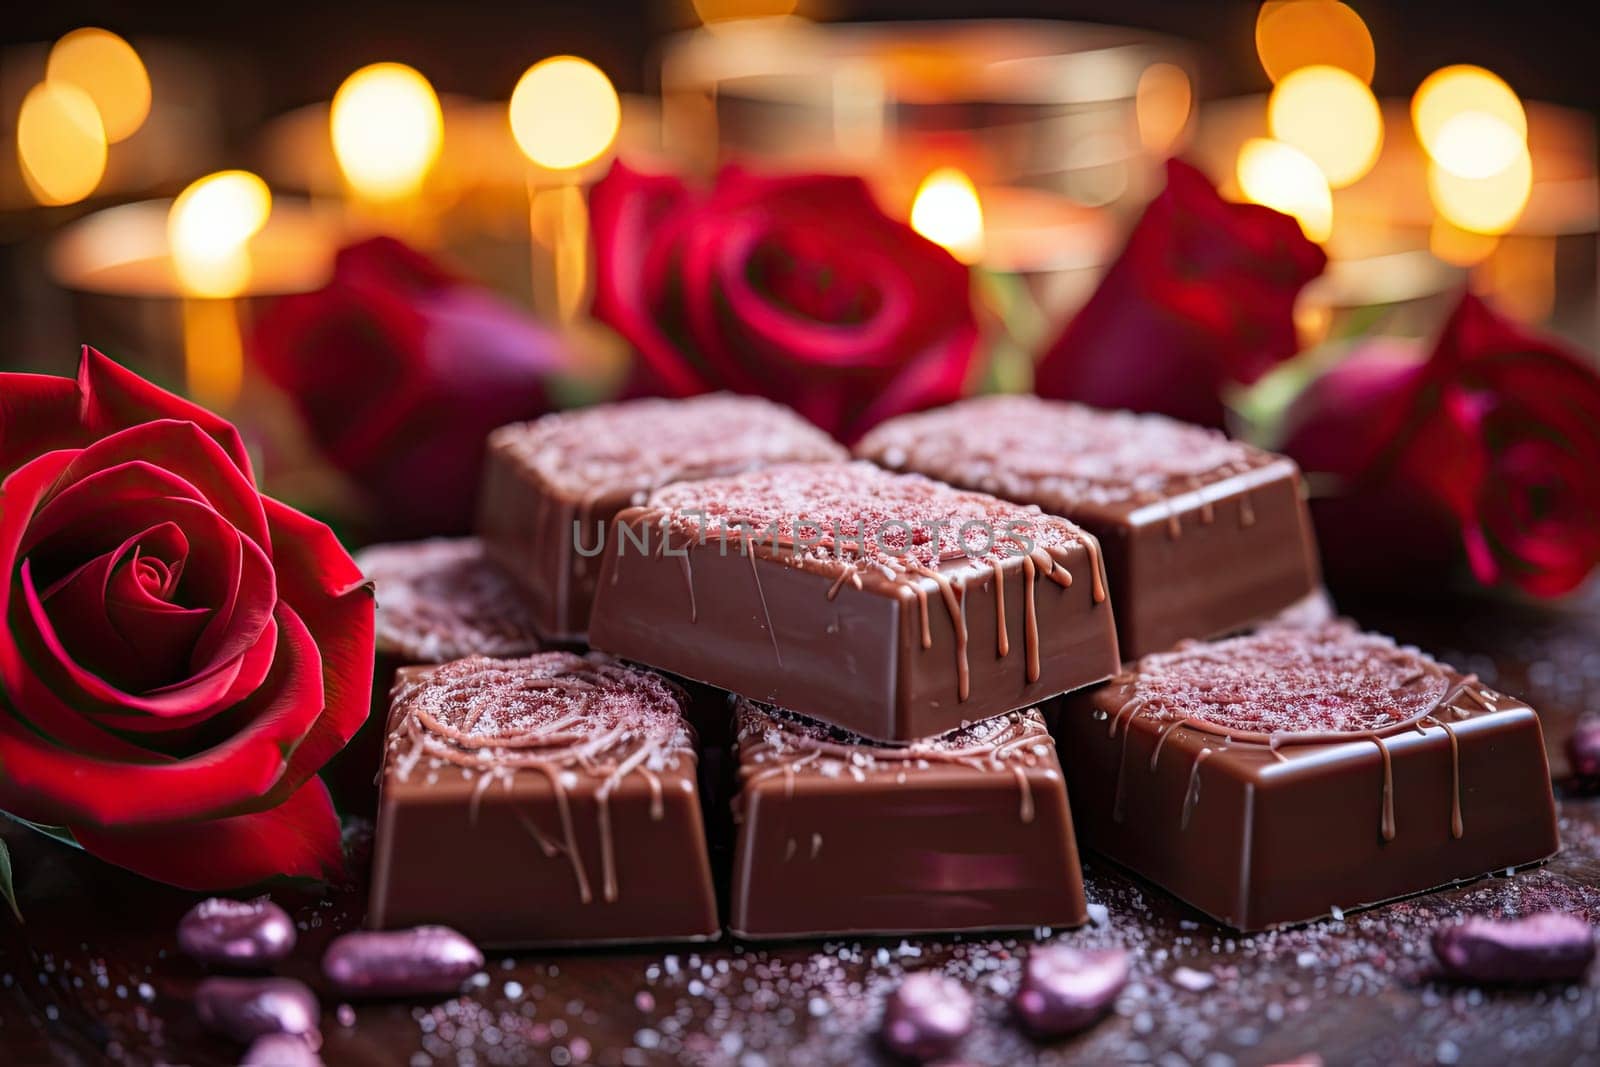 A Romantic Delight: A Table Set with Tempting Chocolates and Fragrant Roses